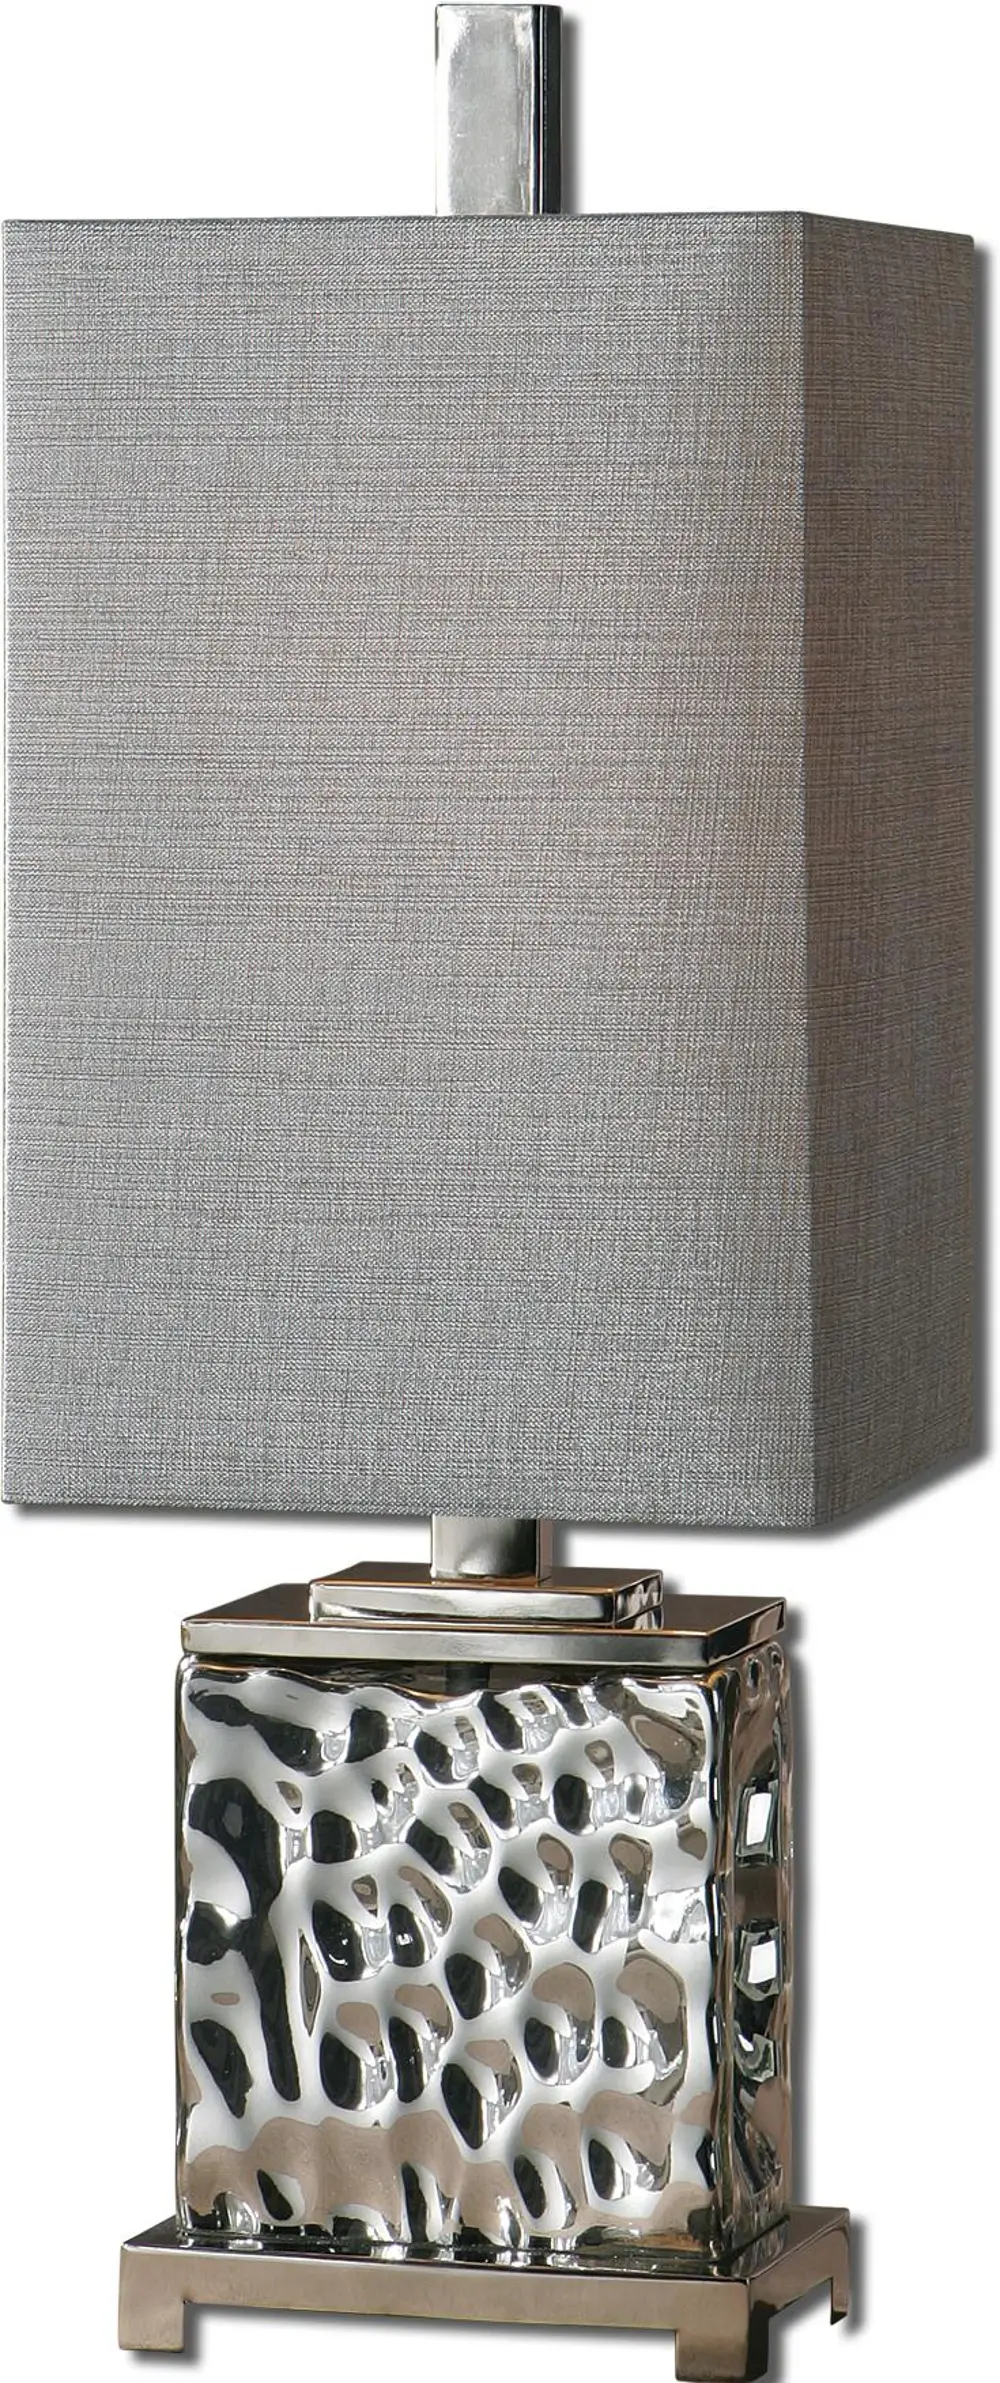 Nickel Plated Table Lamp-1